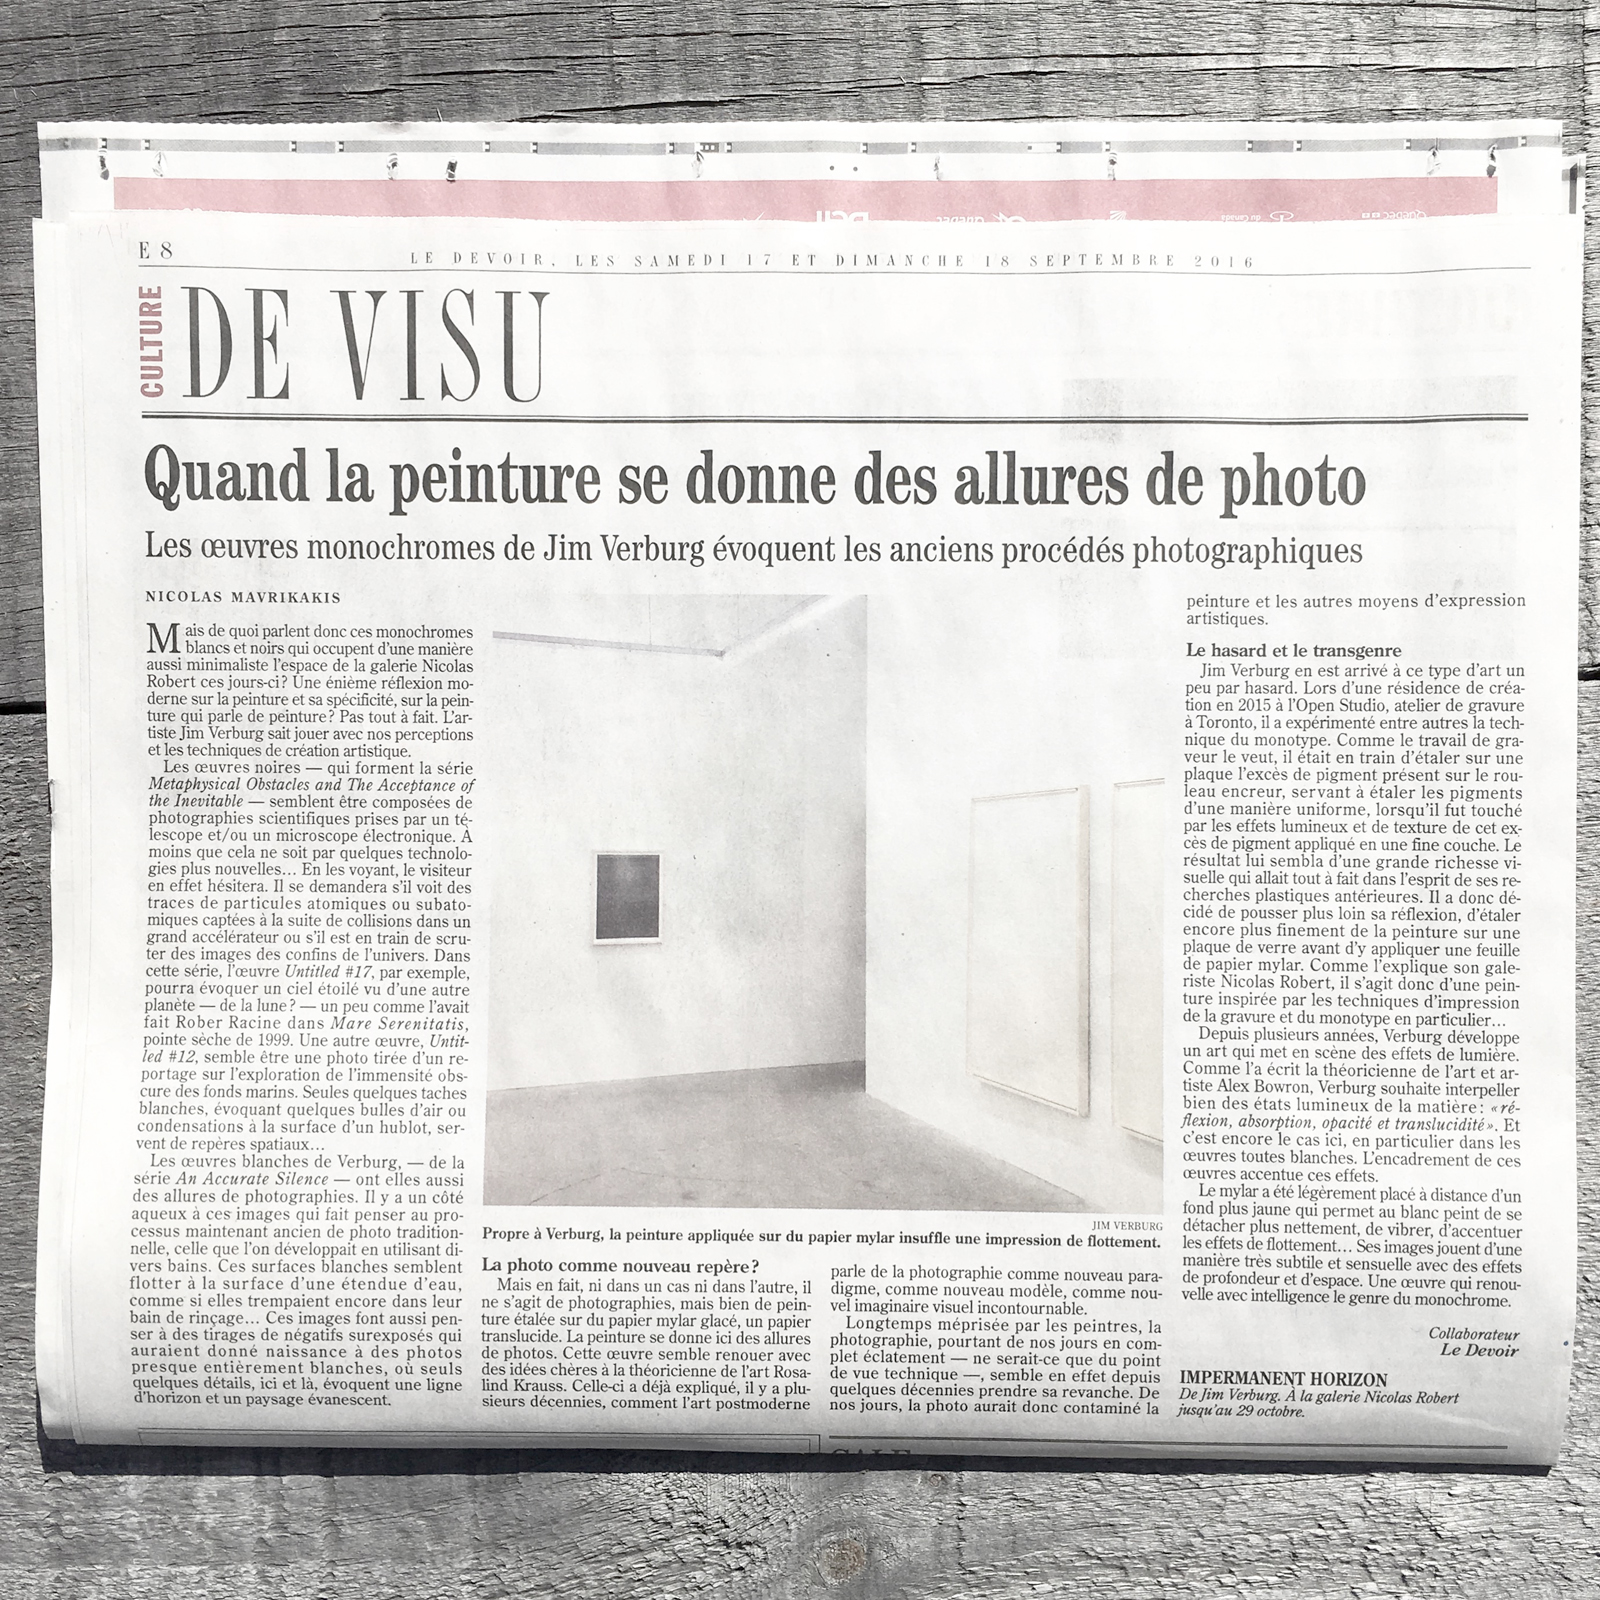   Review in Le Devoir, September 17, 2016:&nbsp; Nicolas Mavrikakis,&nbsp;Painting in the guise of photography: Jim Verburg’s monochrome works evoke old photographic processes,&nbsp;   